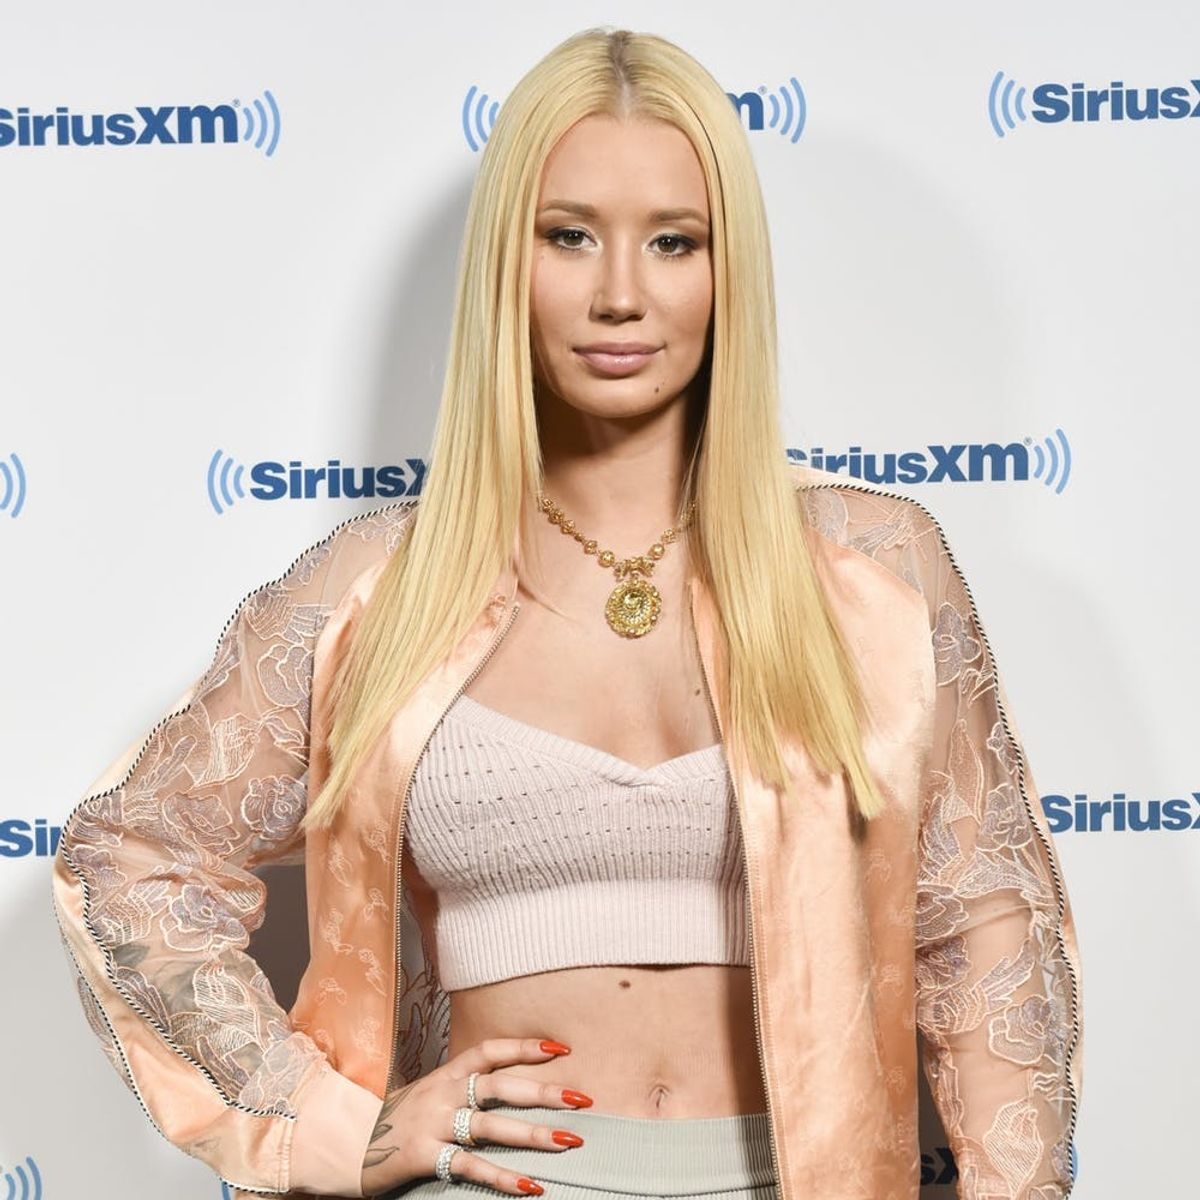 Here’s What Iggy Azaela Has to Say About Halsey’s Jabs at Her Over Cultural Appropriation